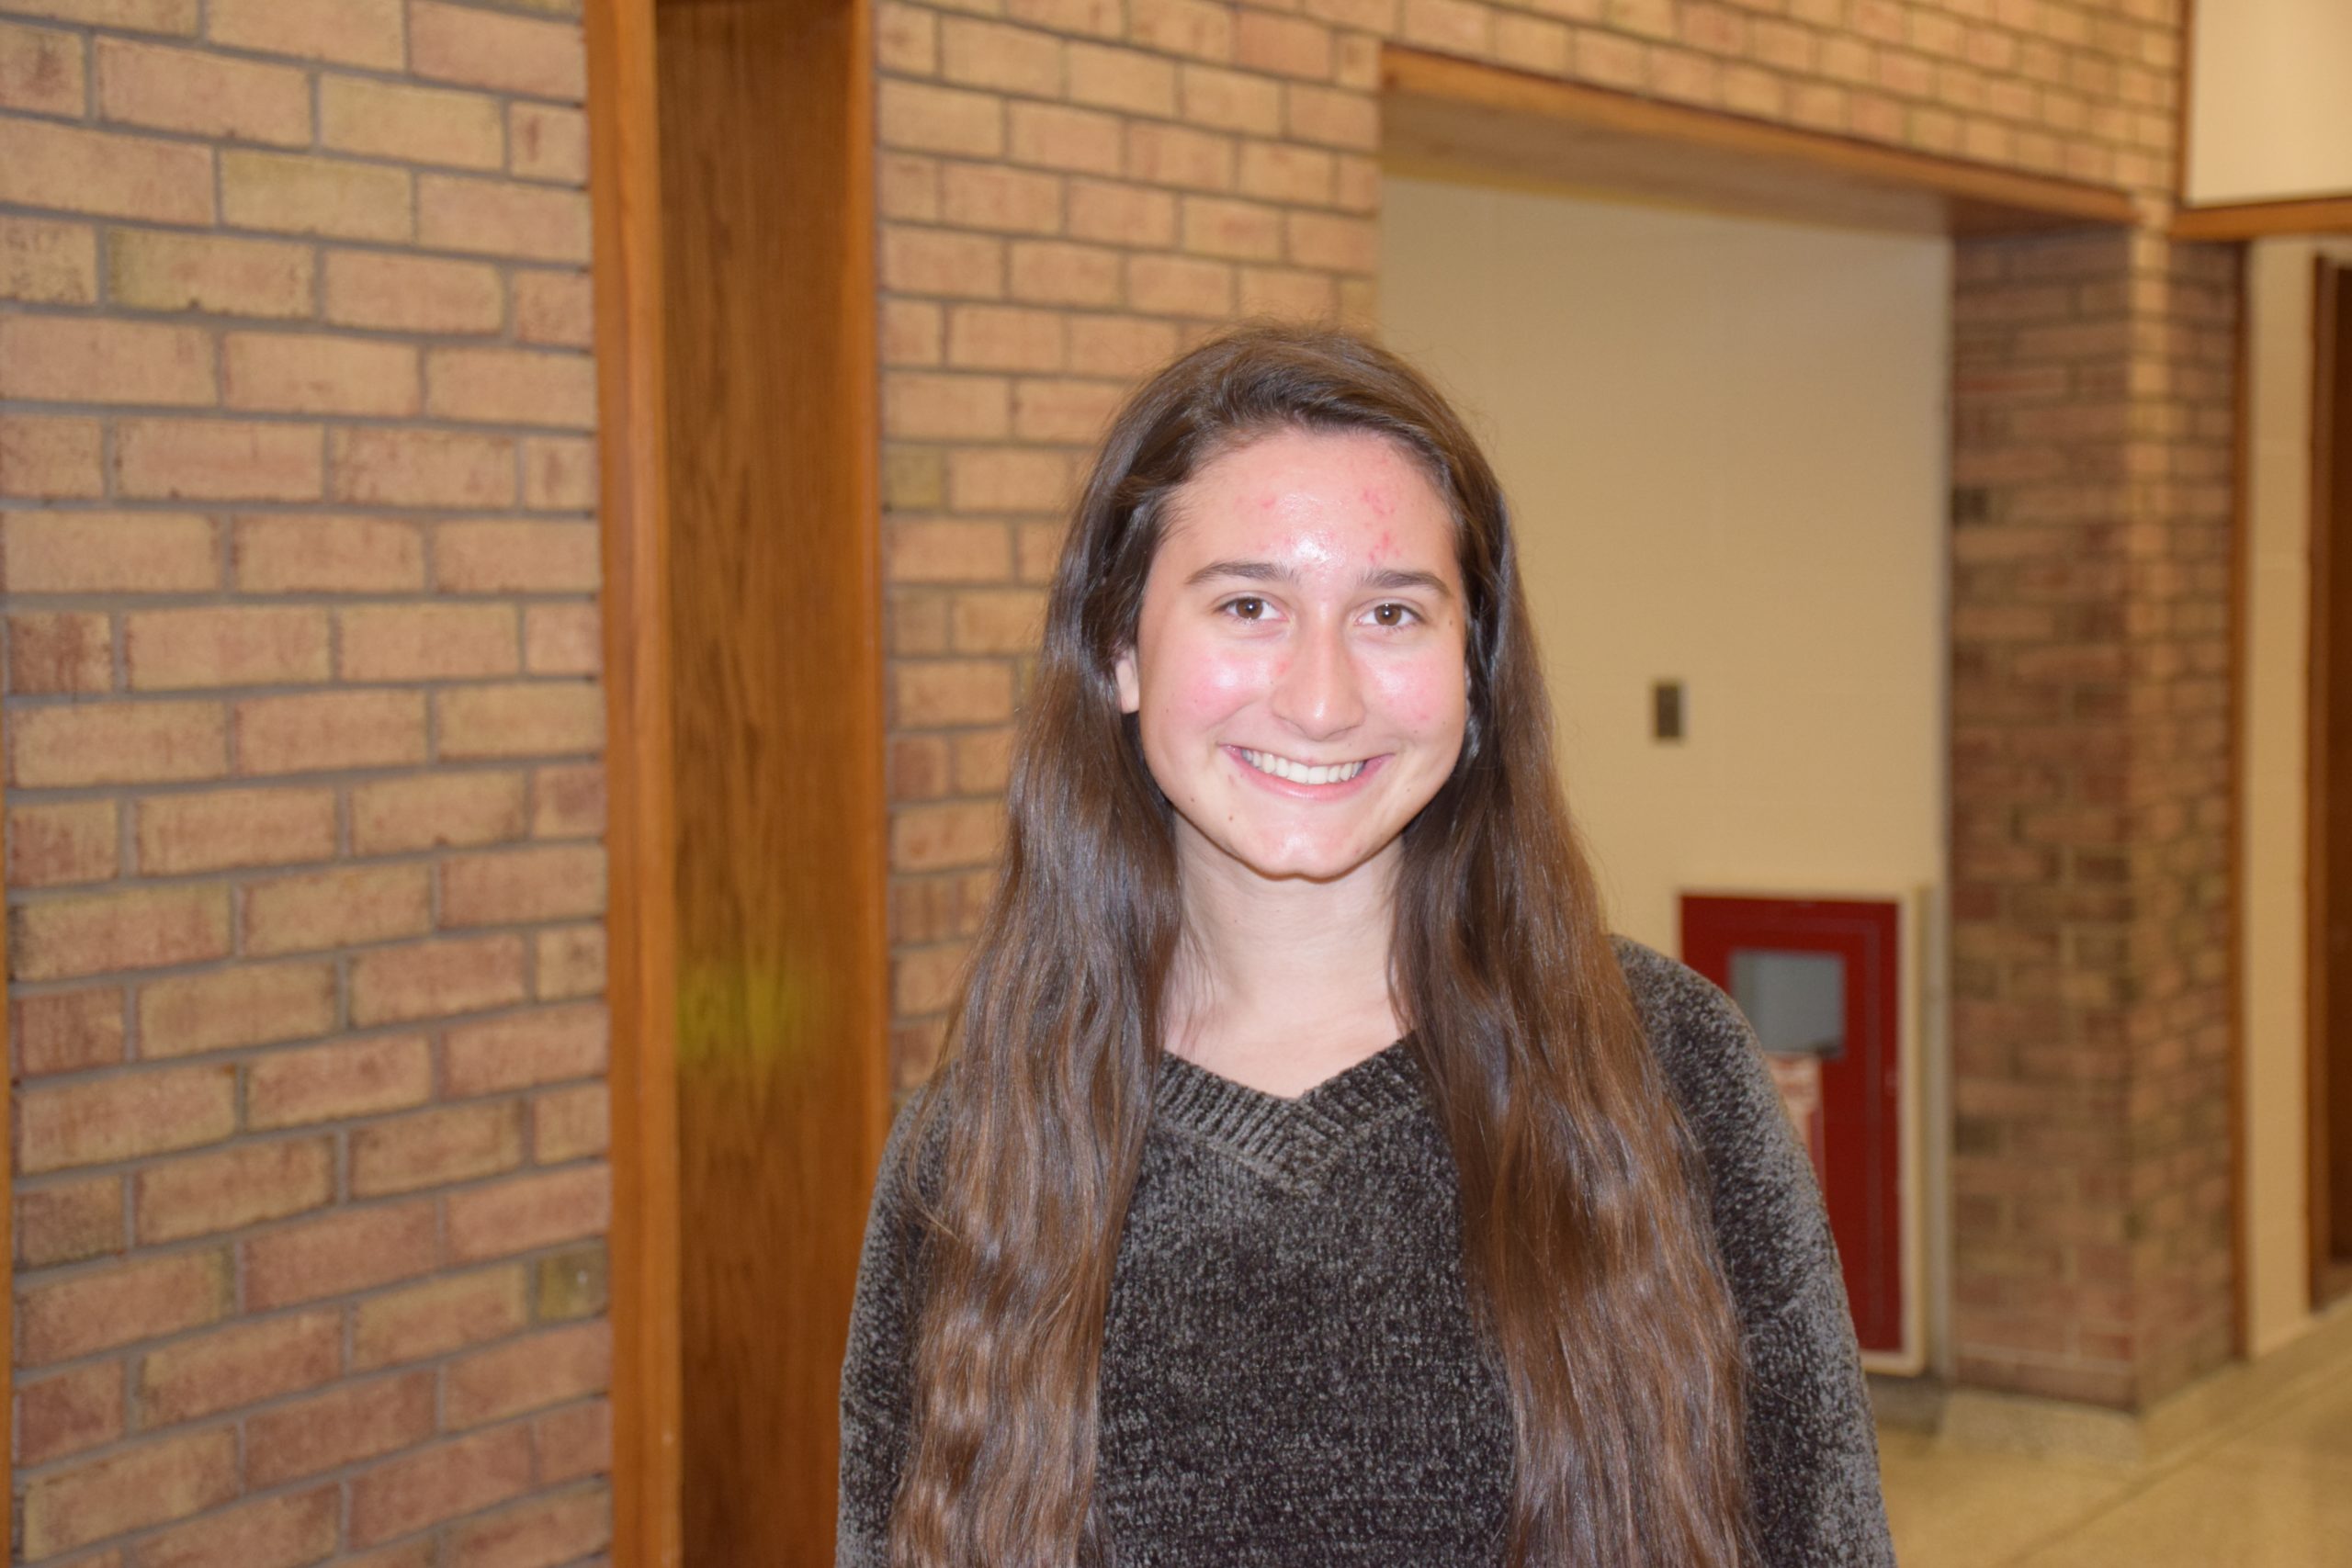 Hampton Bays High School senior Gabrielle Caine is the founder of Harmony Healing, an organization of student-musicians who perform in senior citizen centers.